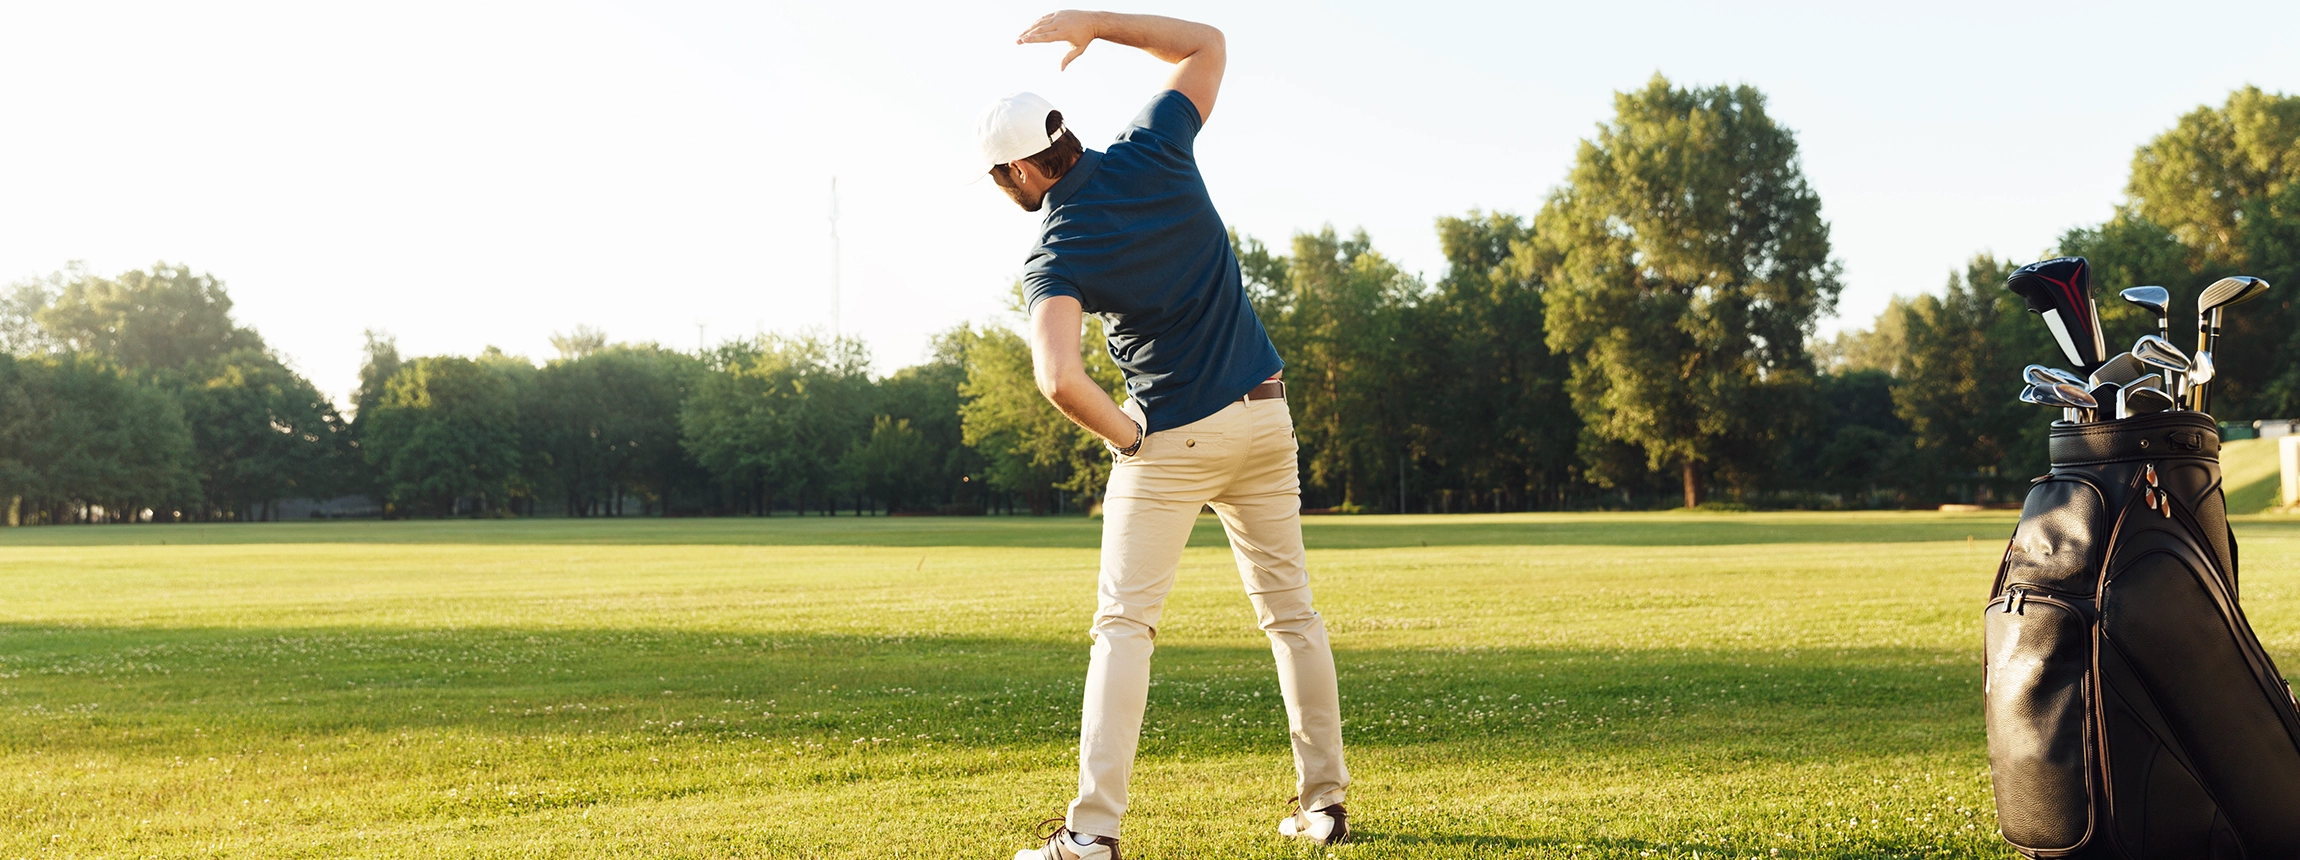 Young male golfer stretching muscles before starting the game